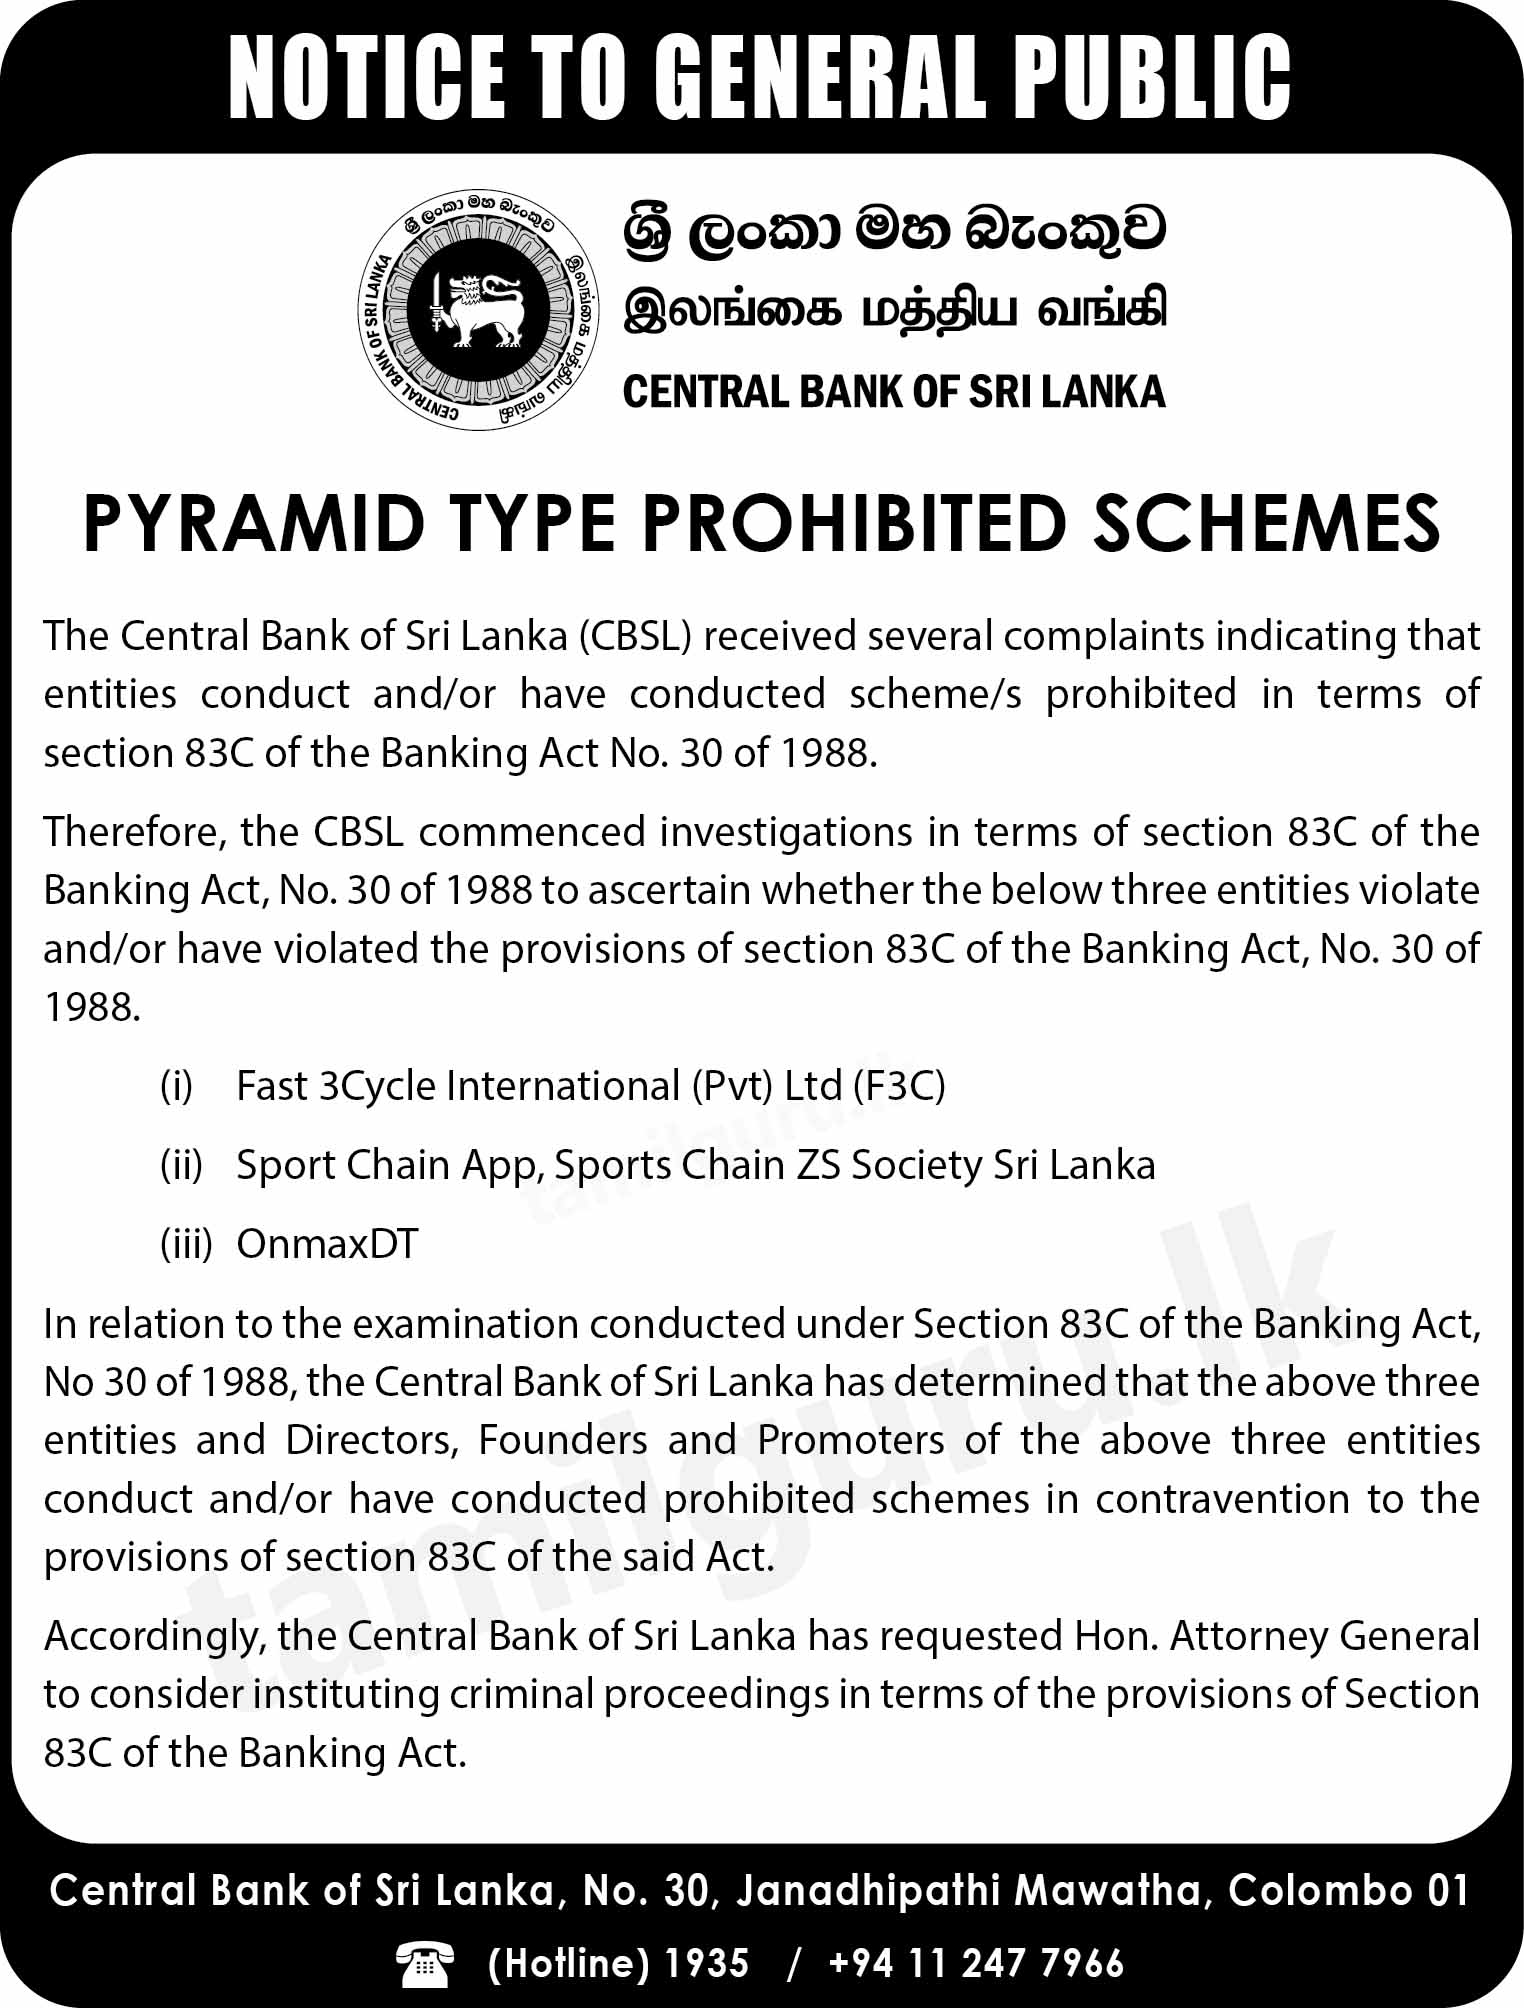 Pyramid Type Prohibited Schemes - Notice to General Public from CBSL